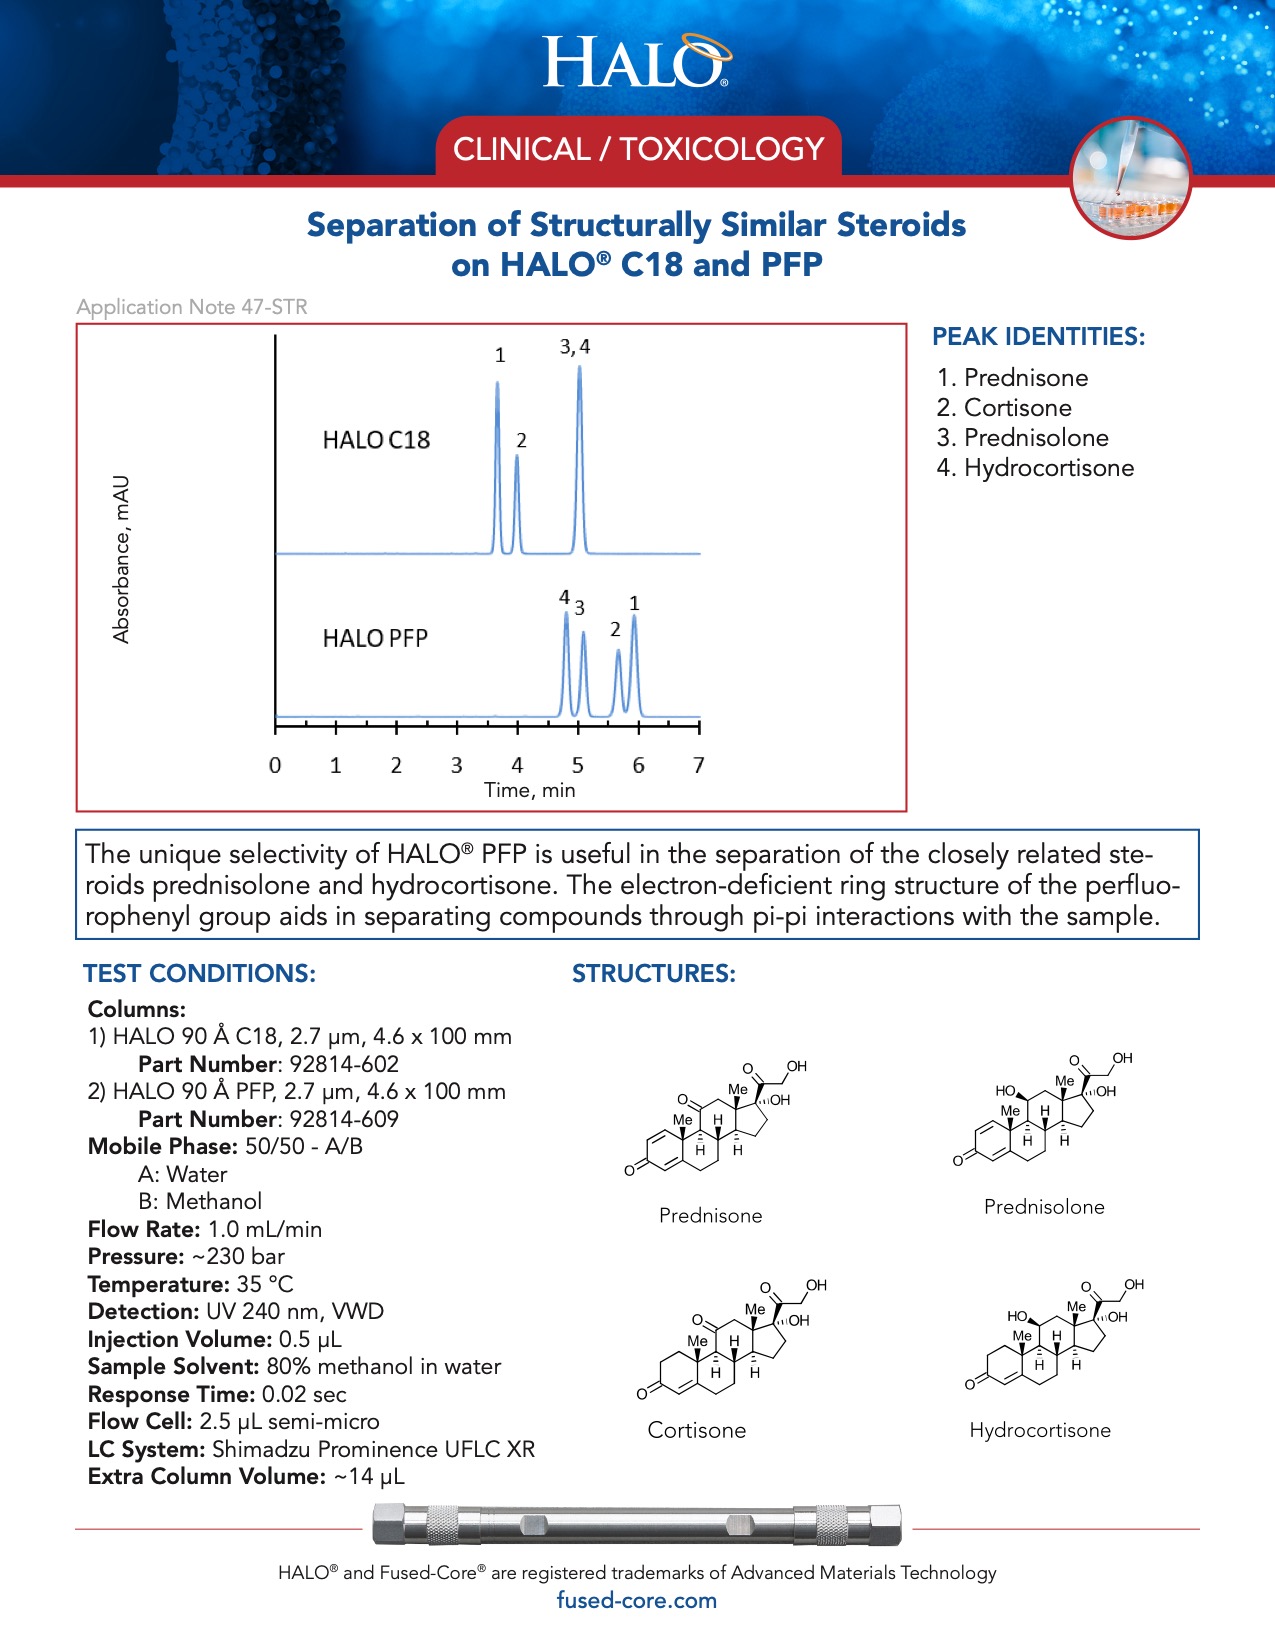 clinical toxicology testing - separation of structurally similar steroids